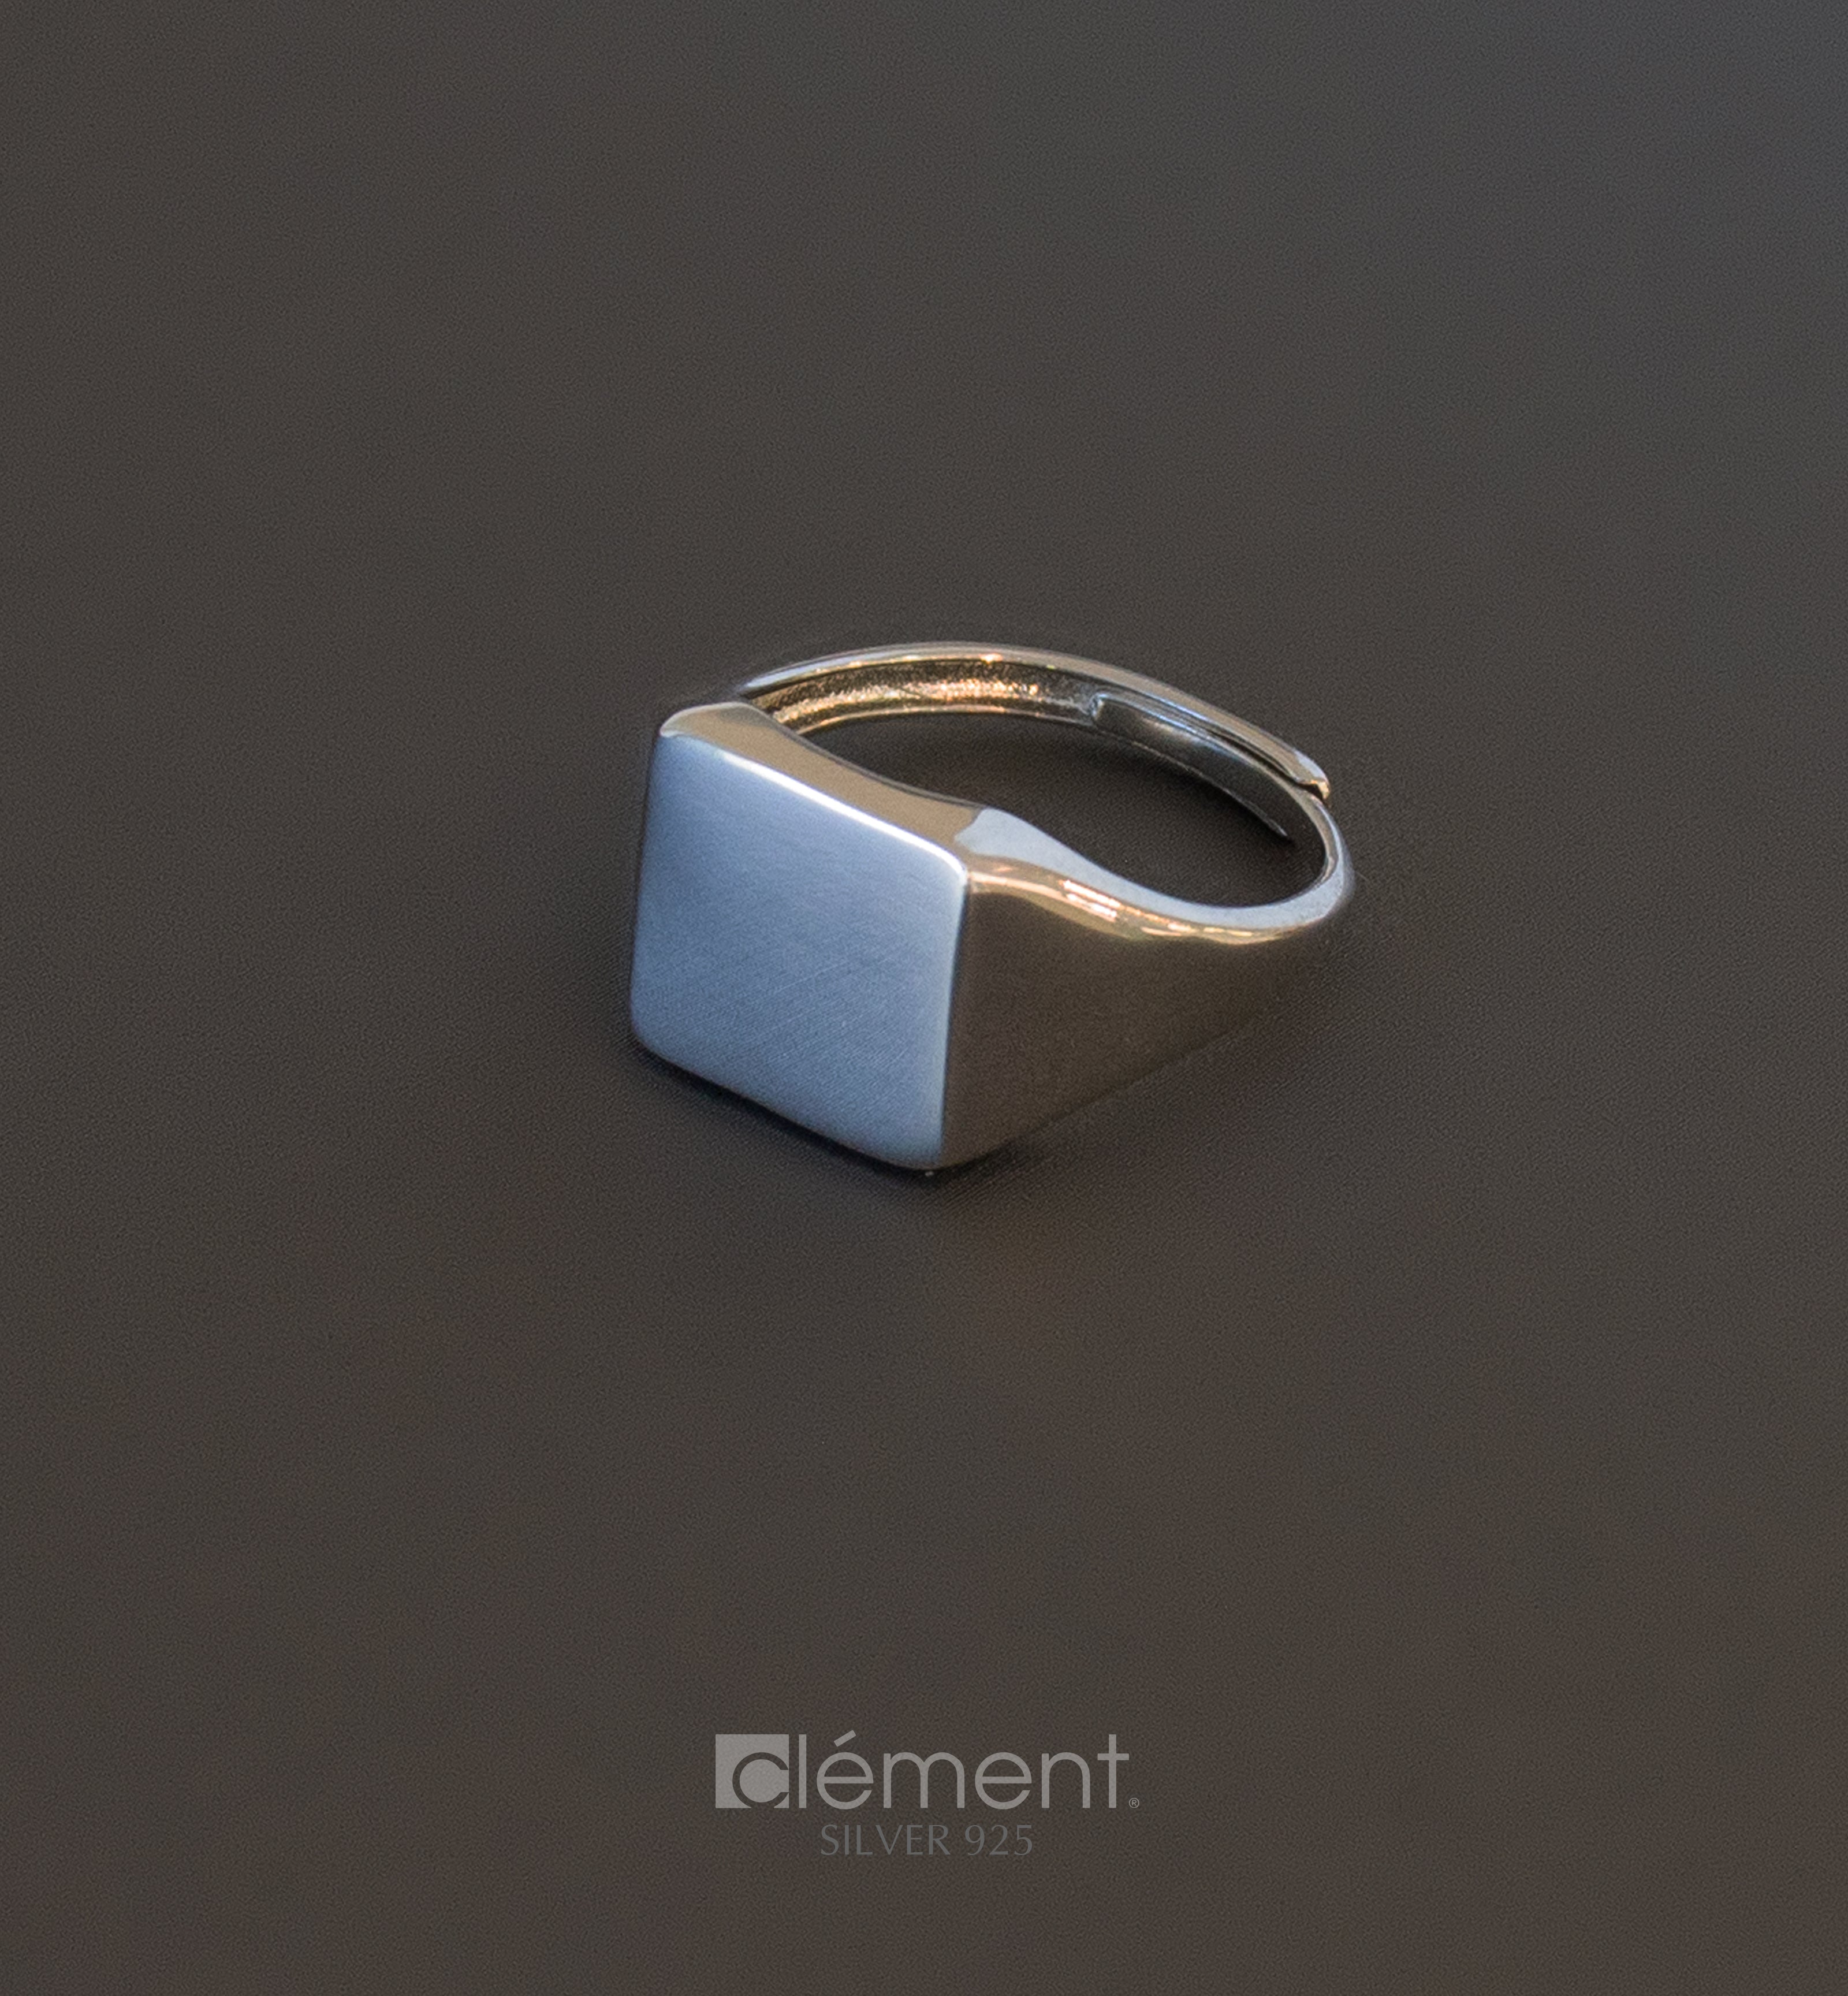 Silver 925 Engraveable Signet Ring